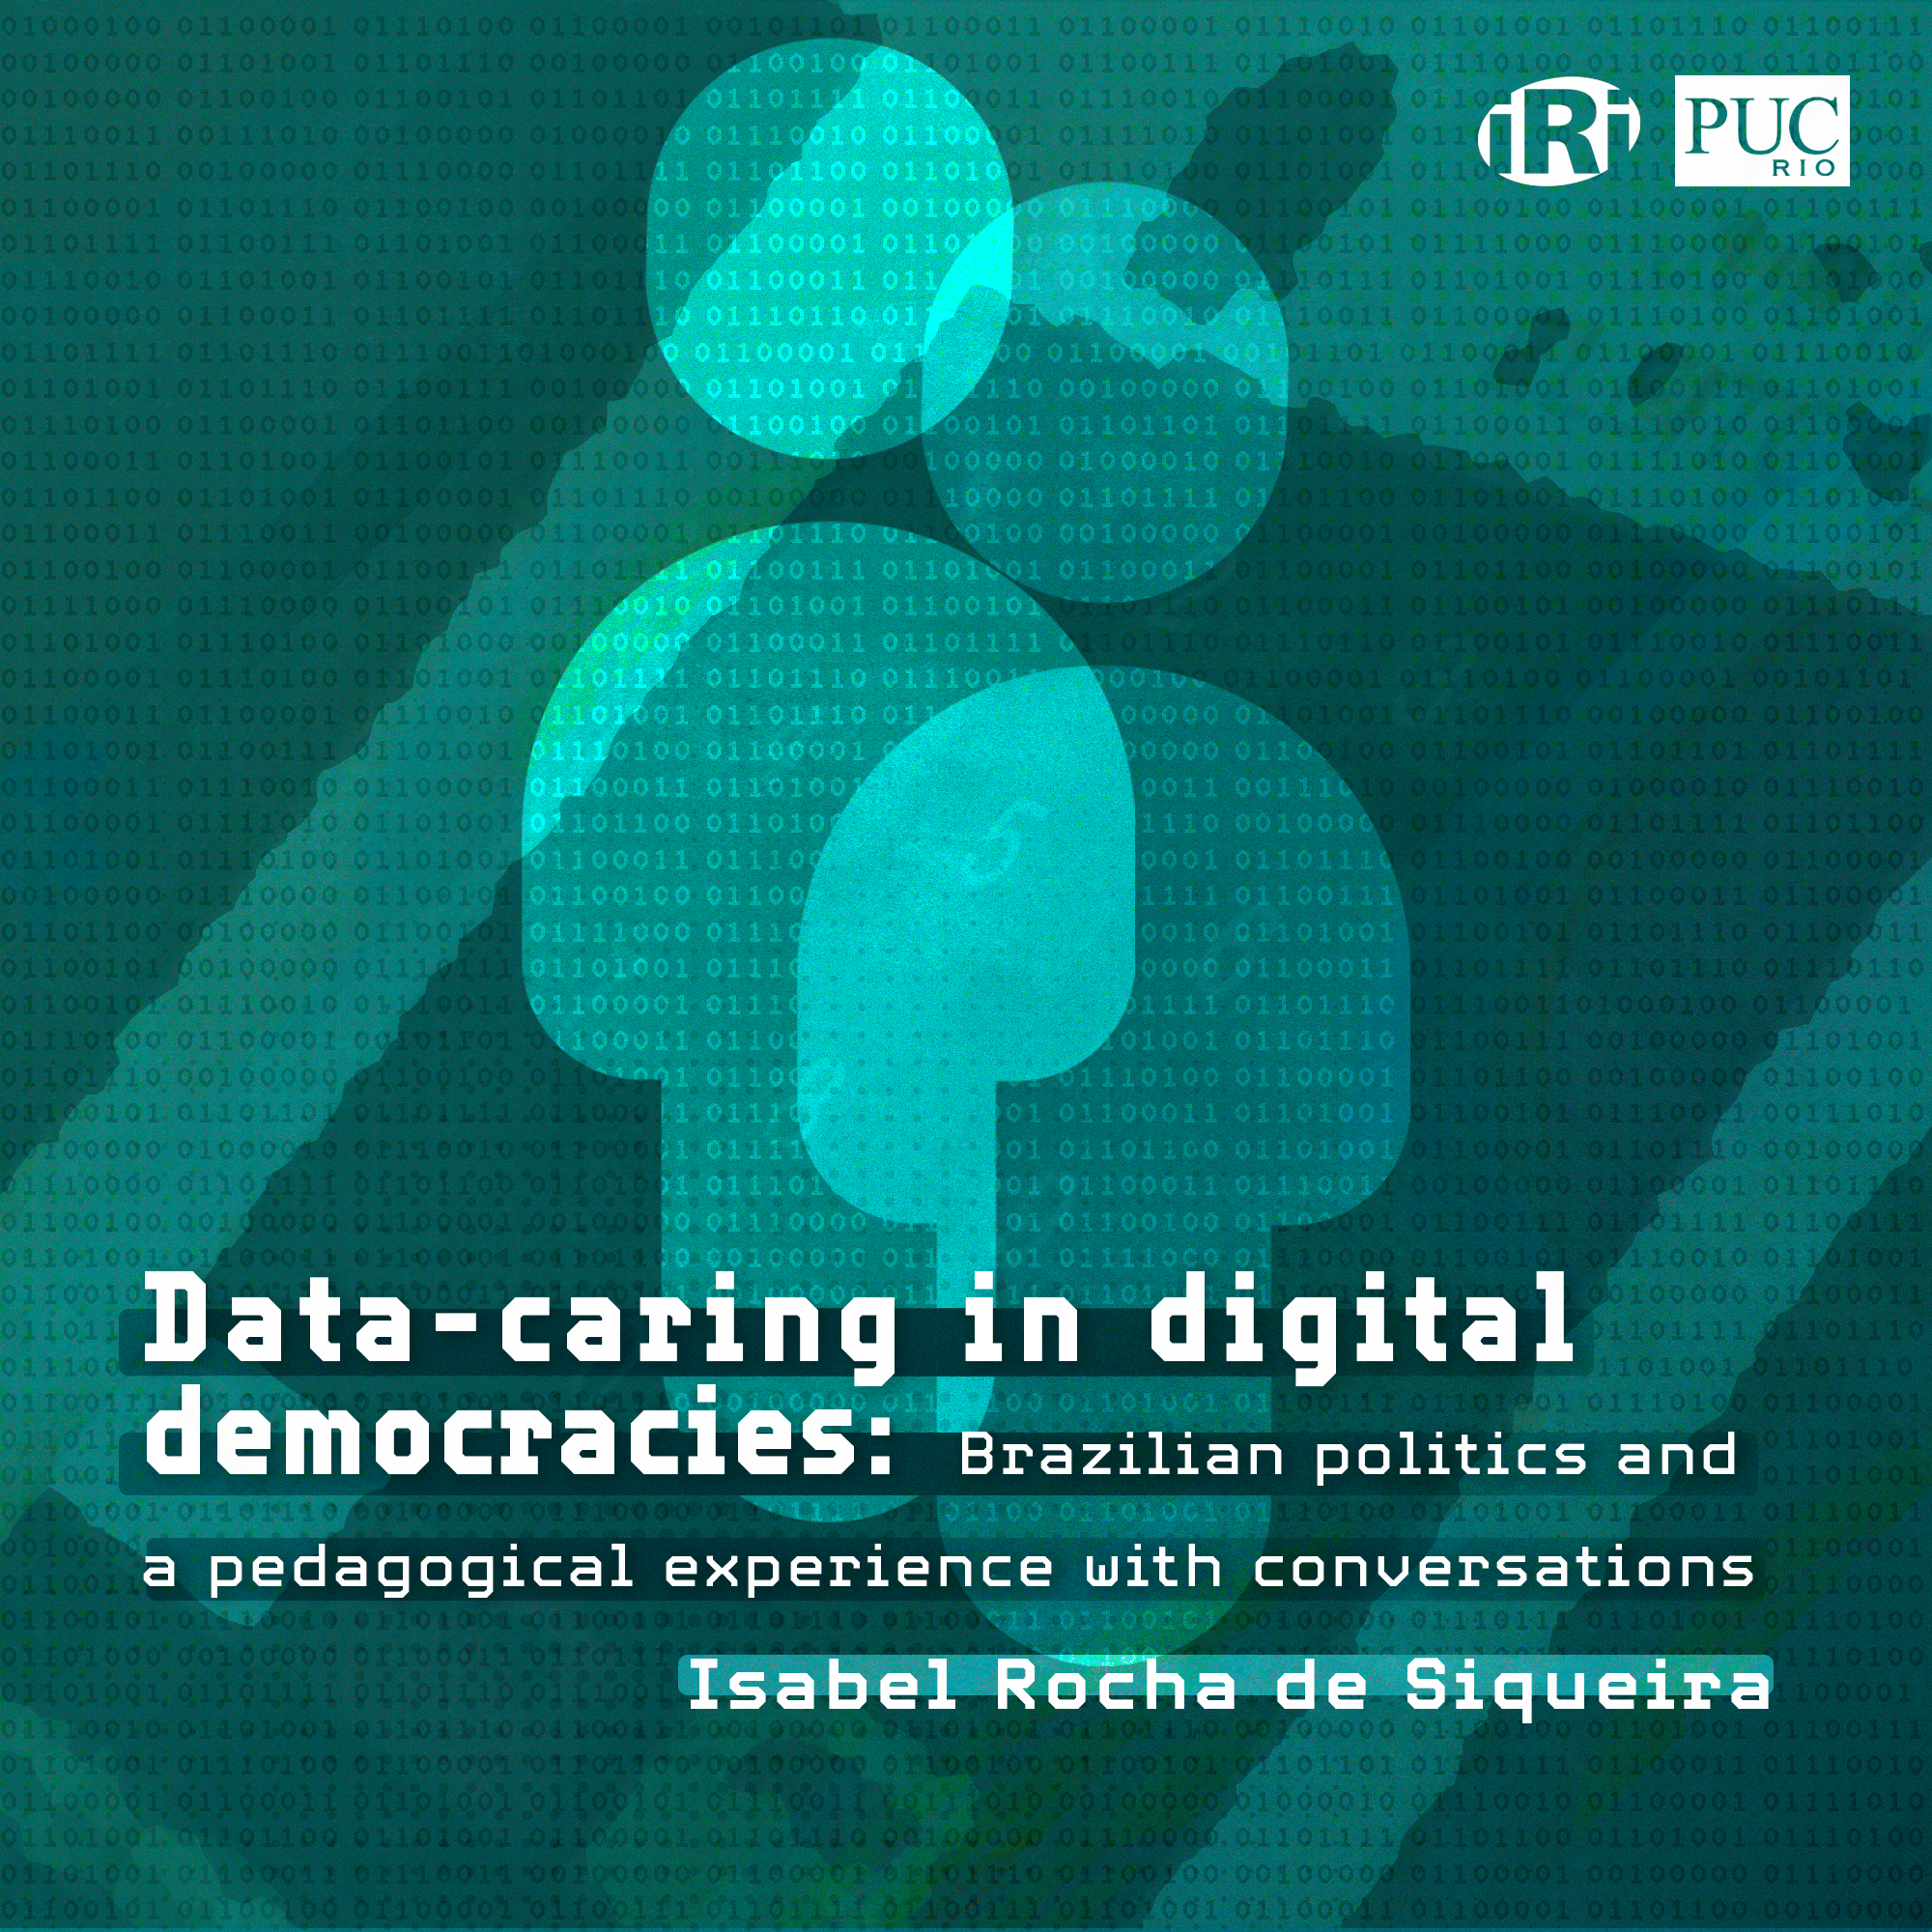 Data-caring in digital democracies: Brazilian politics and a pedagogical experience with conversations